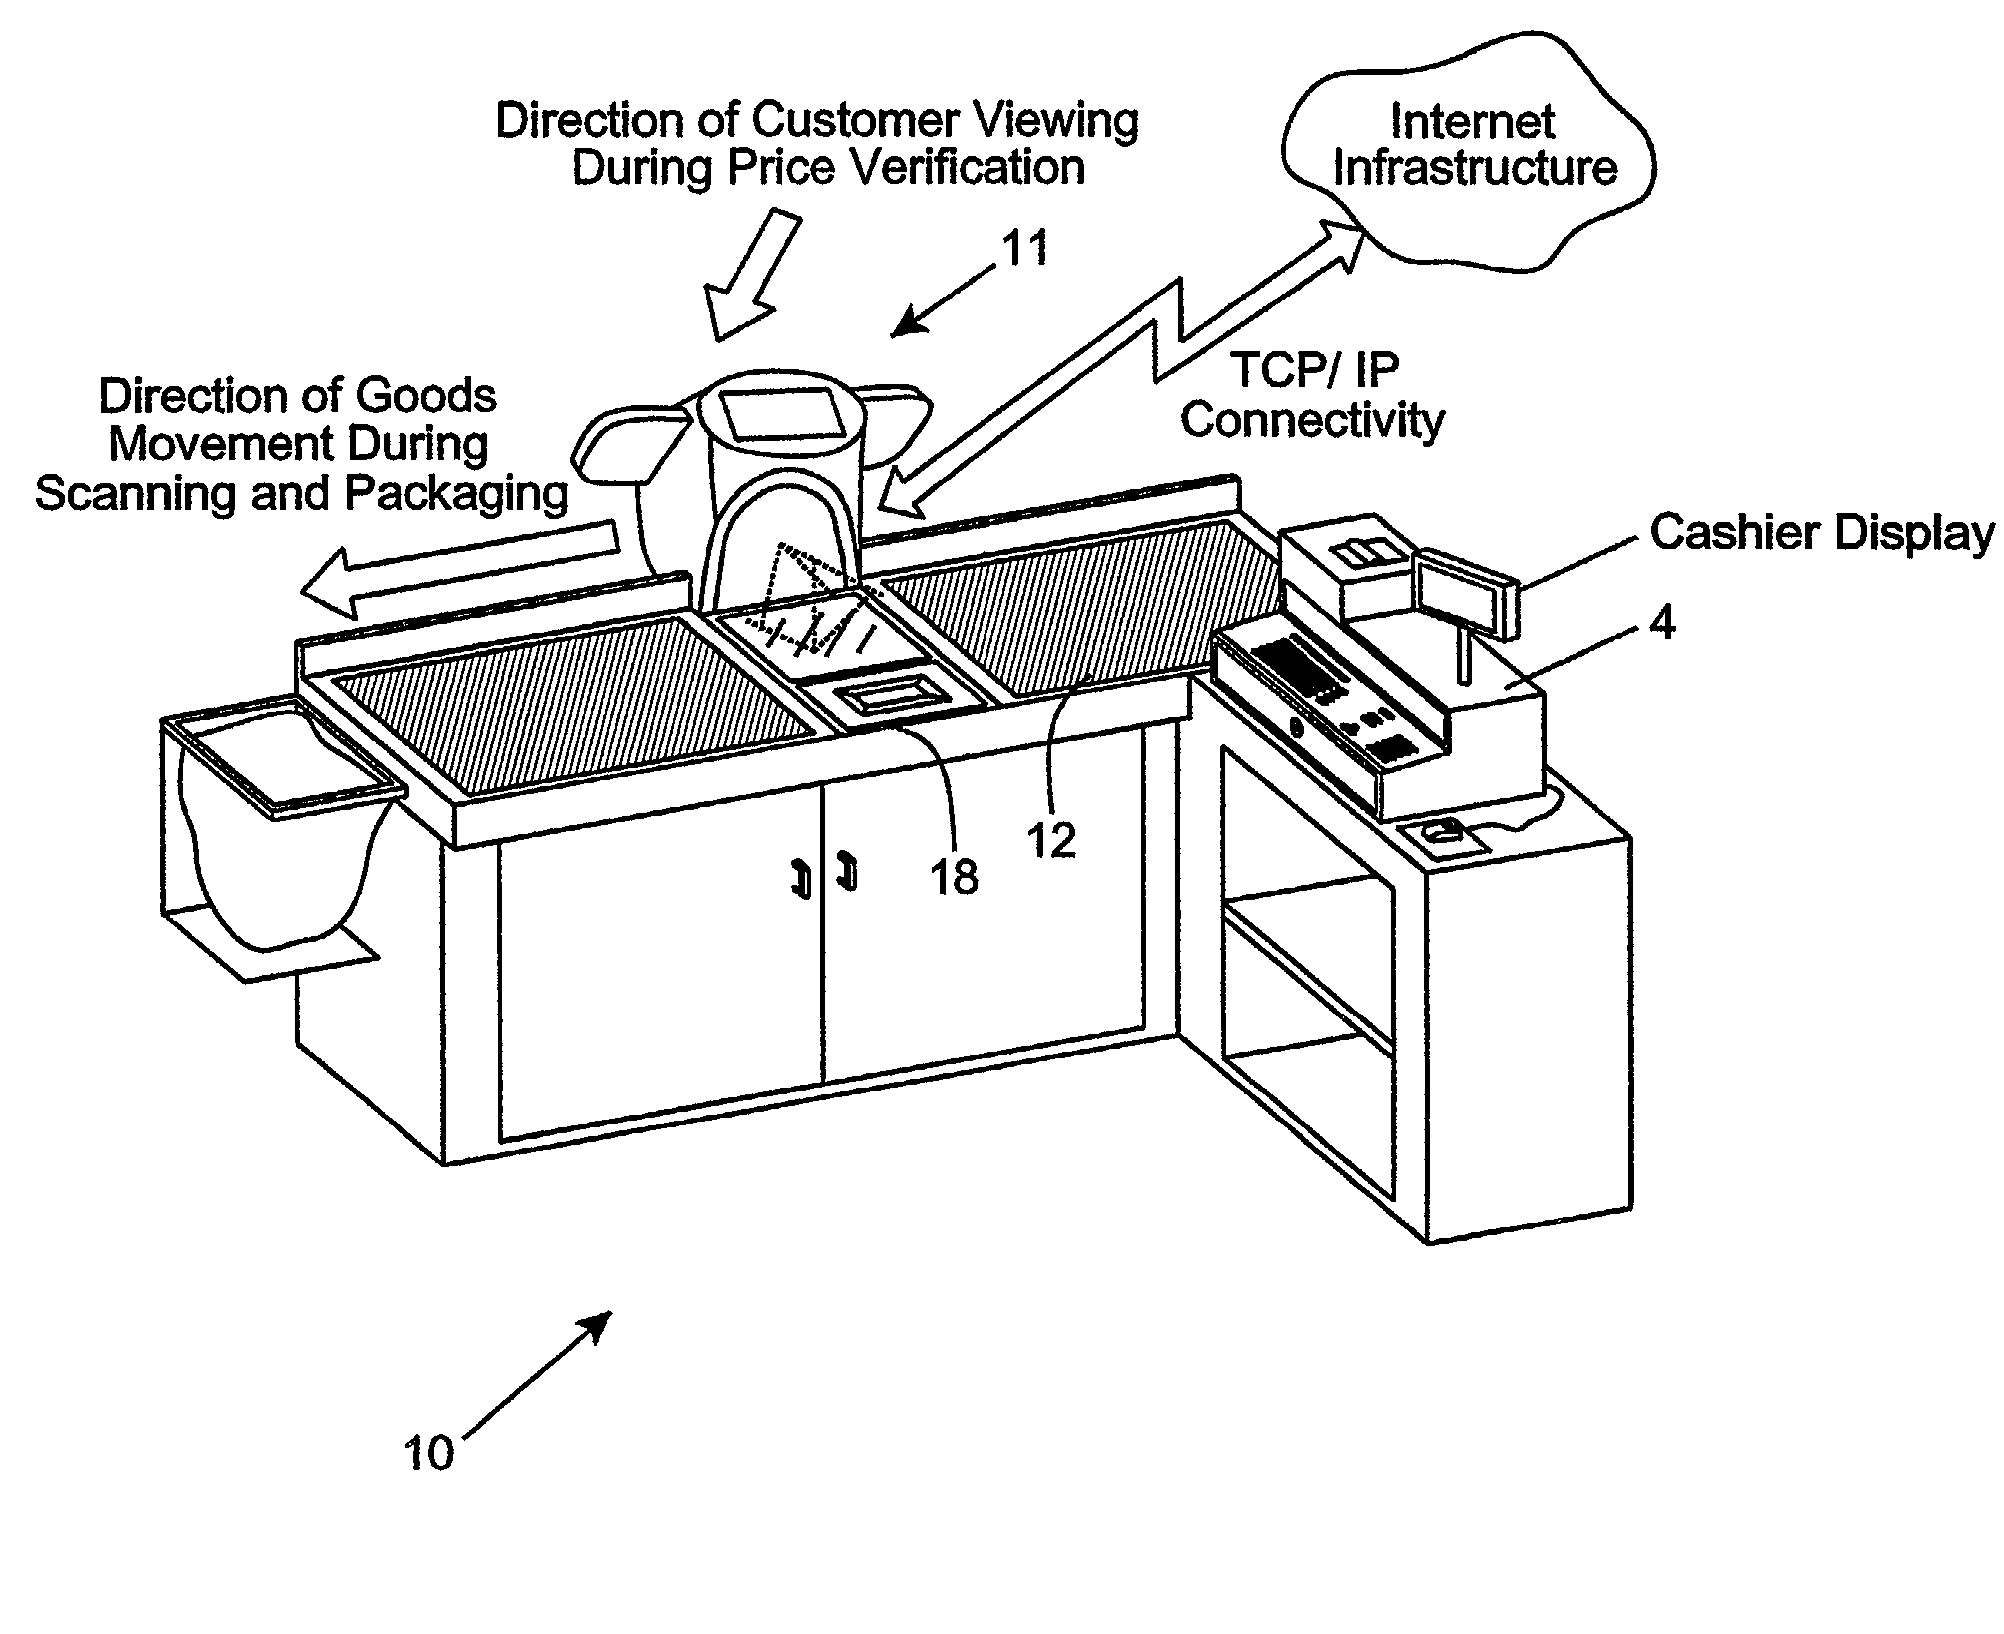 Point-of-sale (POS) based bar code driven cash register system with an integrated internet-enabled customer-kiosk terminal